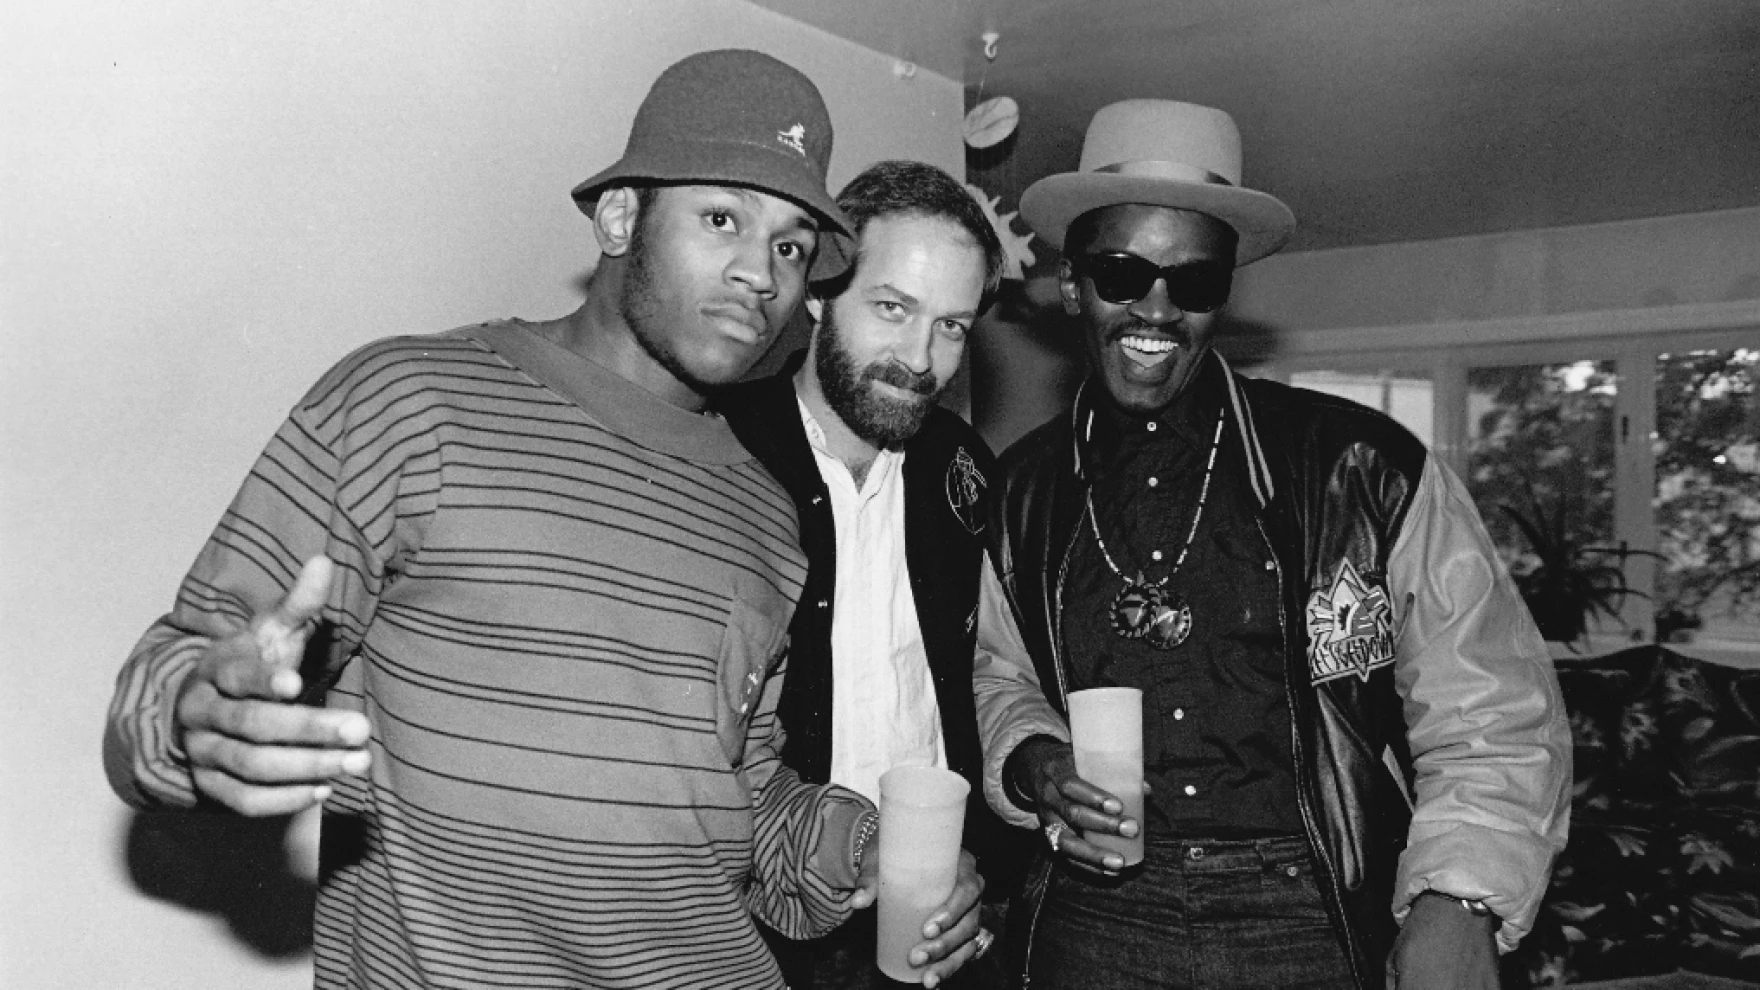 Bill Adler (center) with LL Cool J (left) and Fab 5 Freddy at LL's mother's house in 1988. | Photography by Daniel Root / Courtesy Of Bill Adler